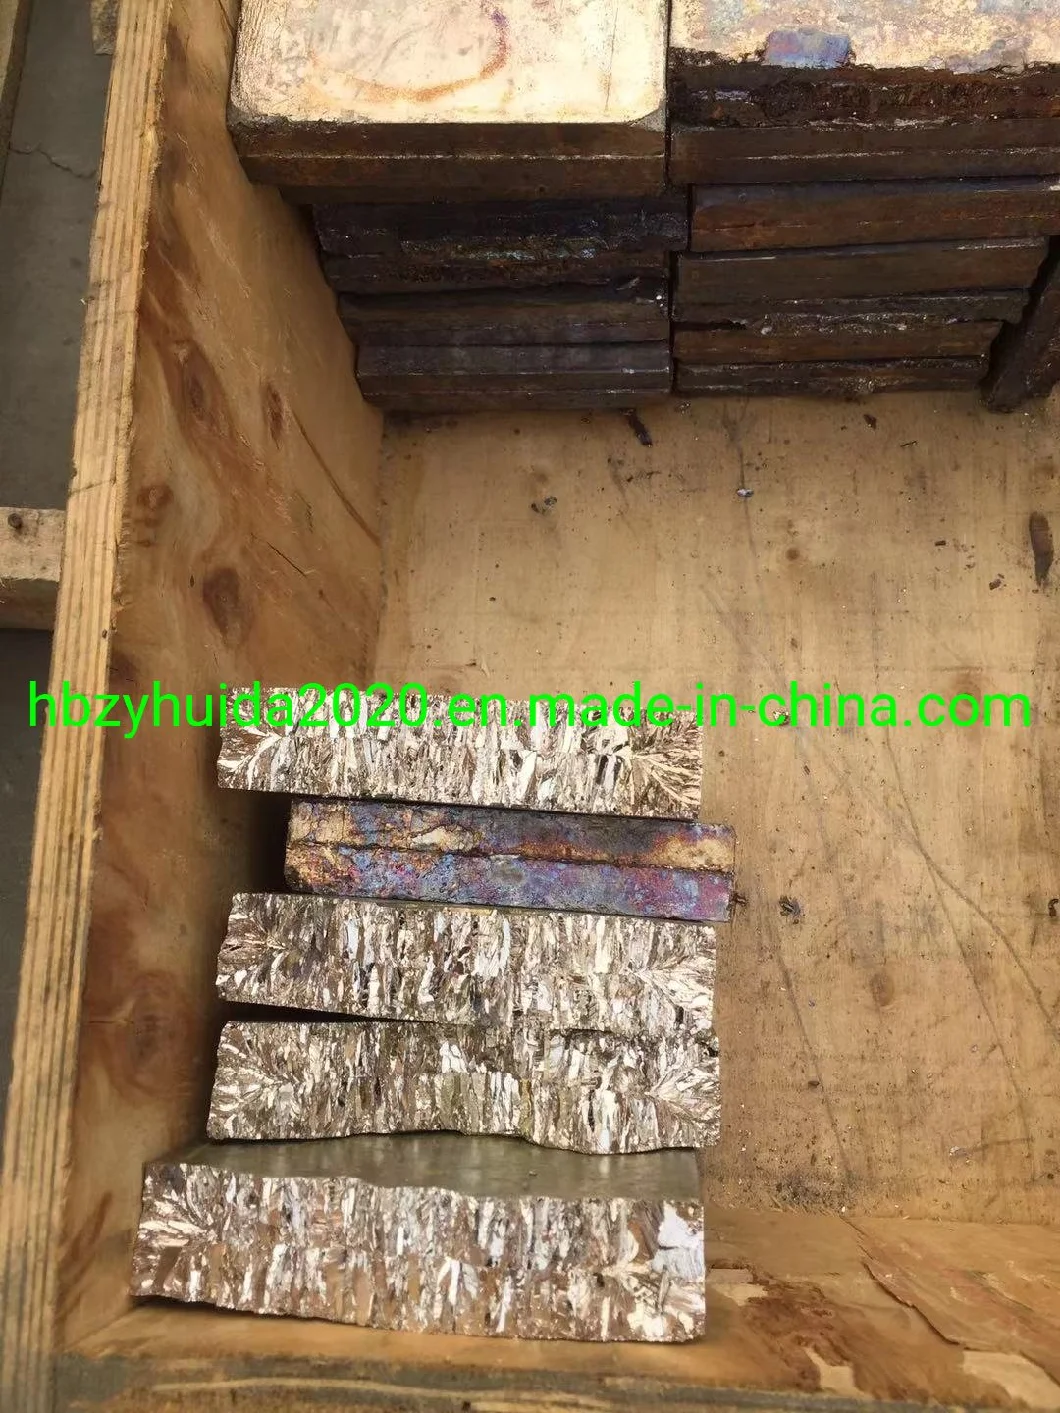 Buy Pure Bismuth and Bismuth Ingot with Good Price